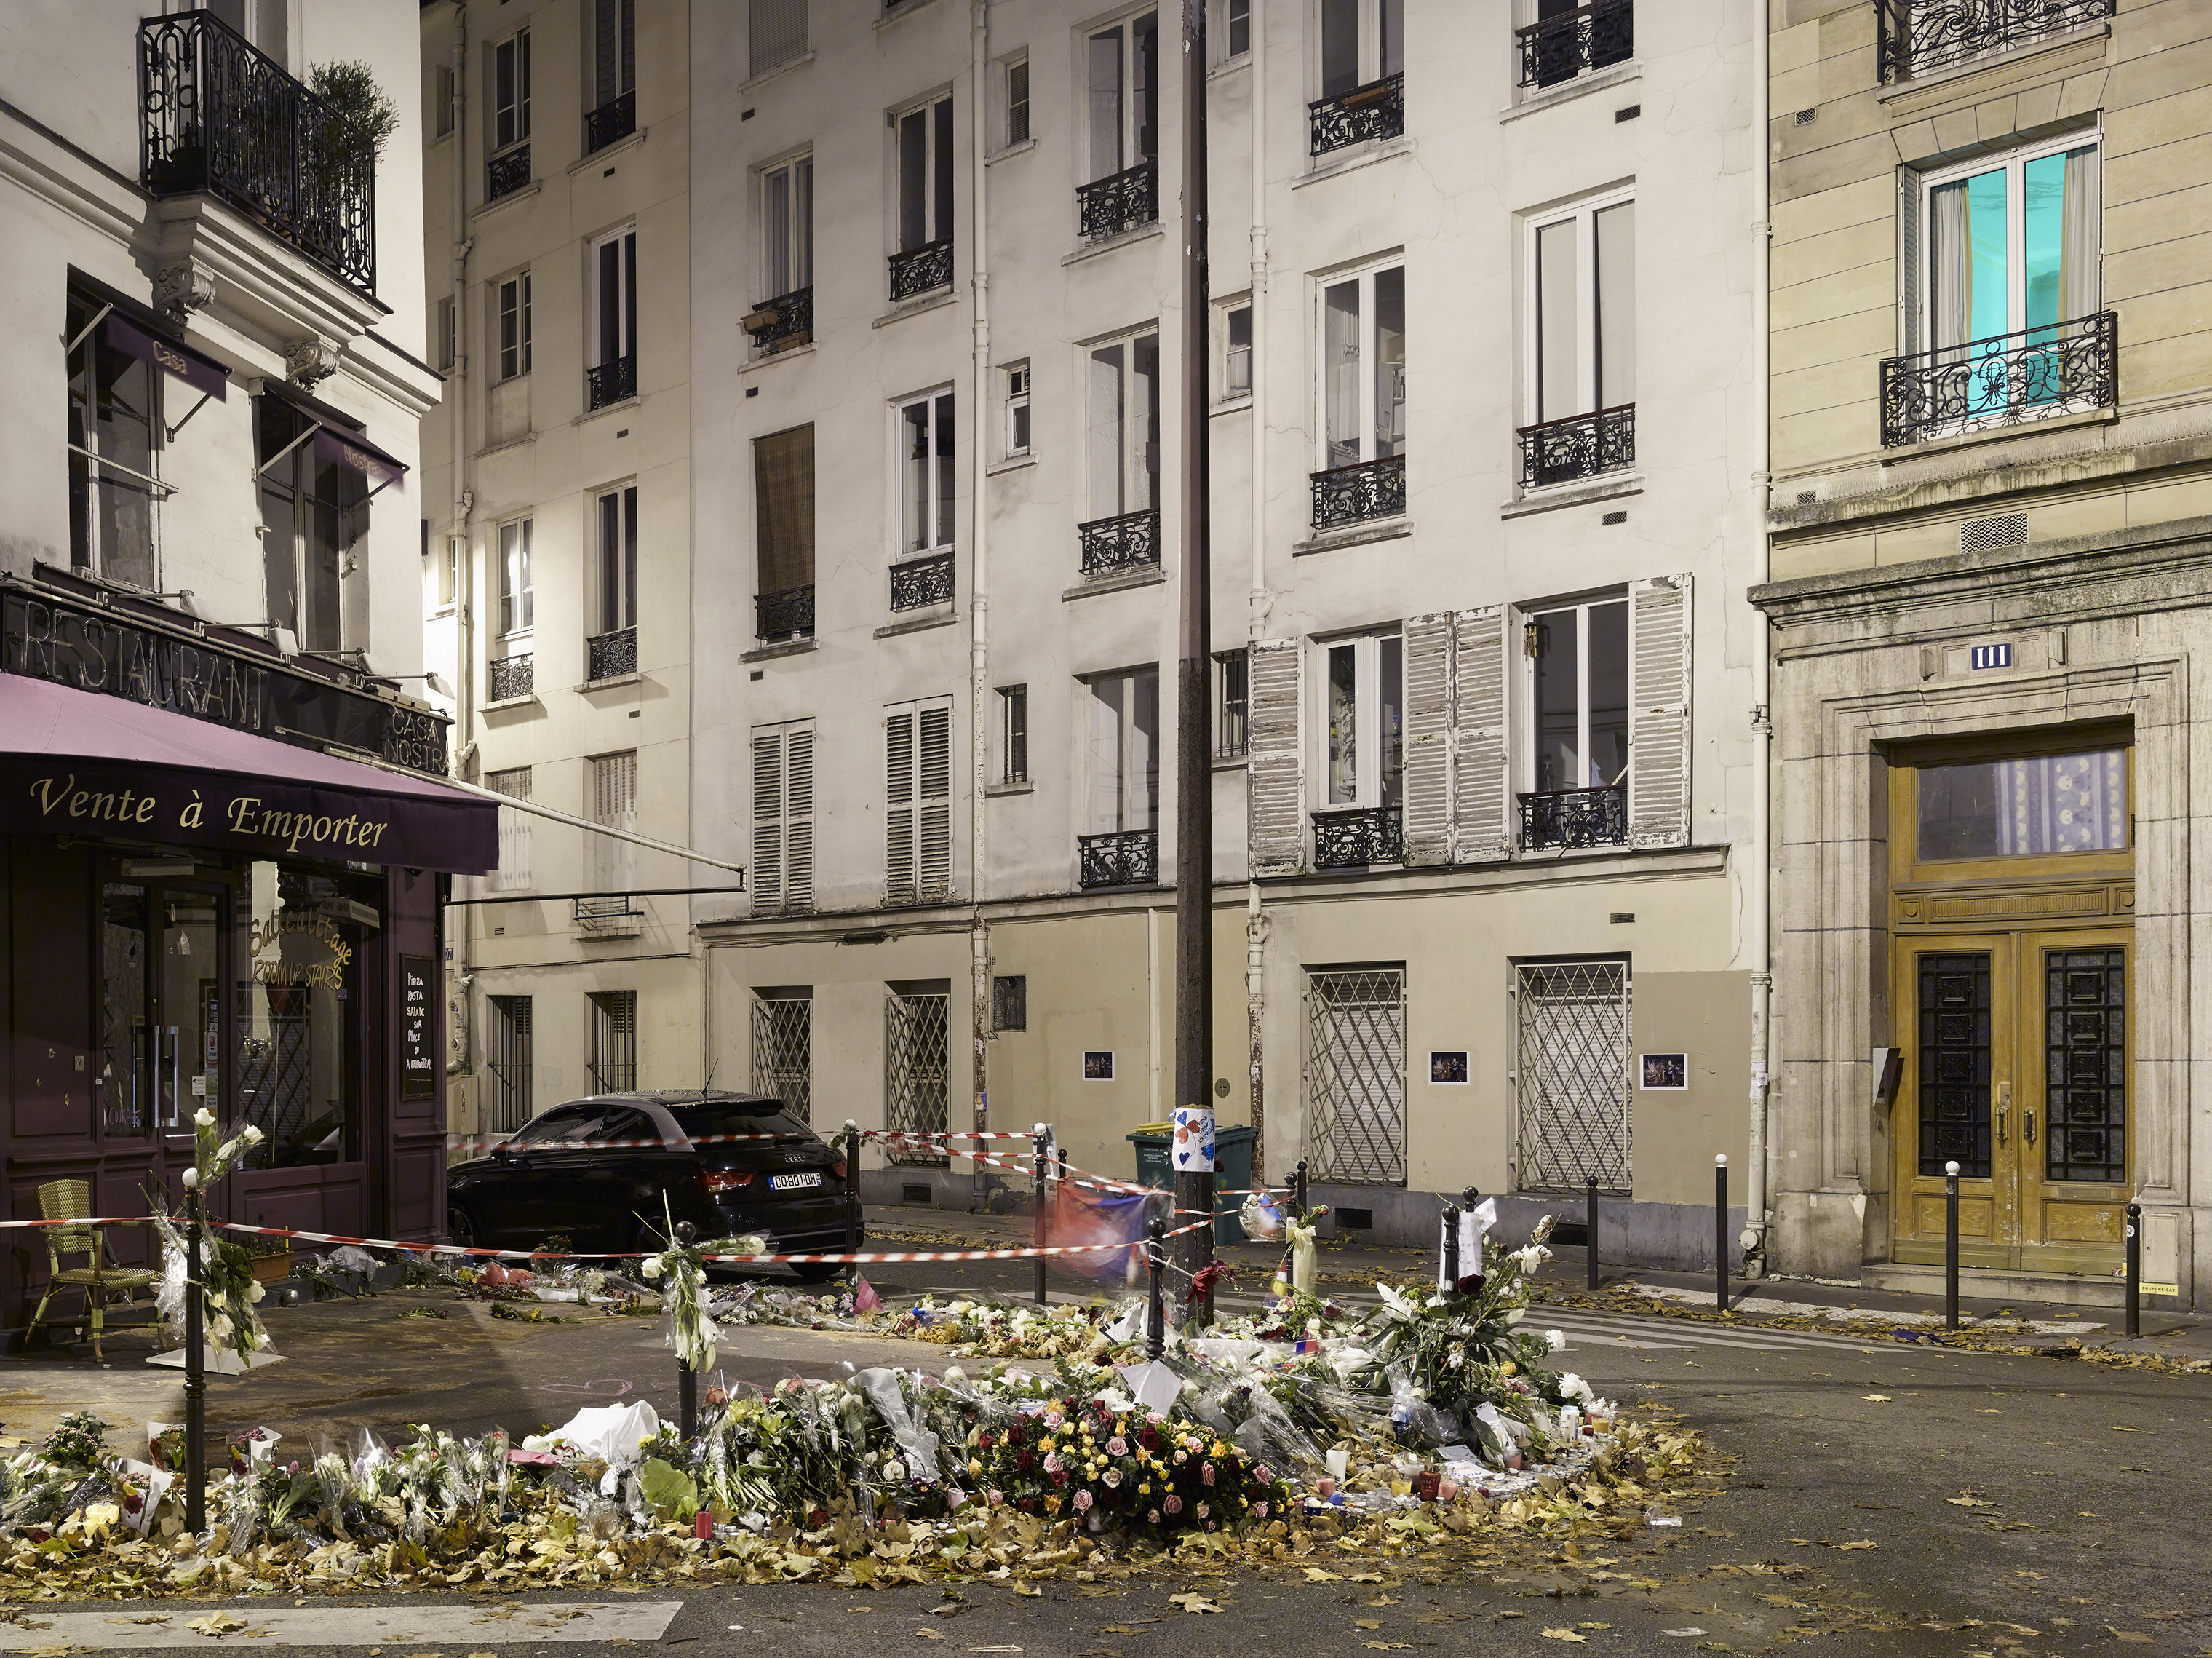 A memorial on the Rue de la Fontaine-au-Roi, in the aftermath of the terror attacks, in Paris on Nov. 18, 2015. (Mark Power—Magnum Photos)